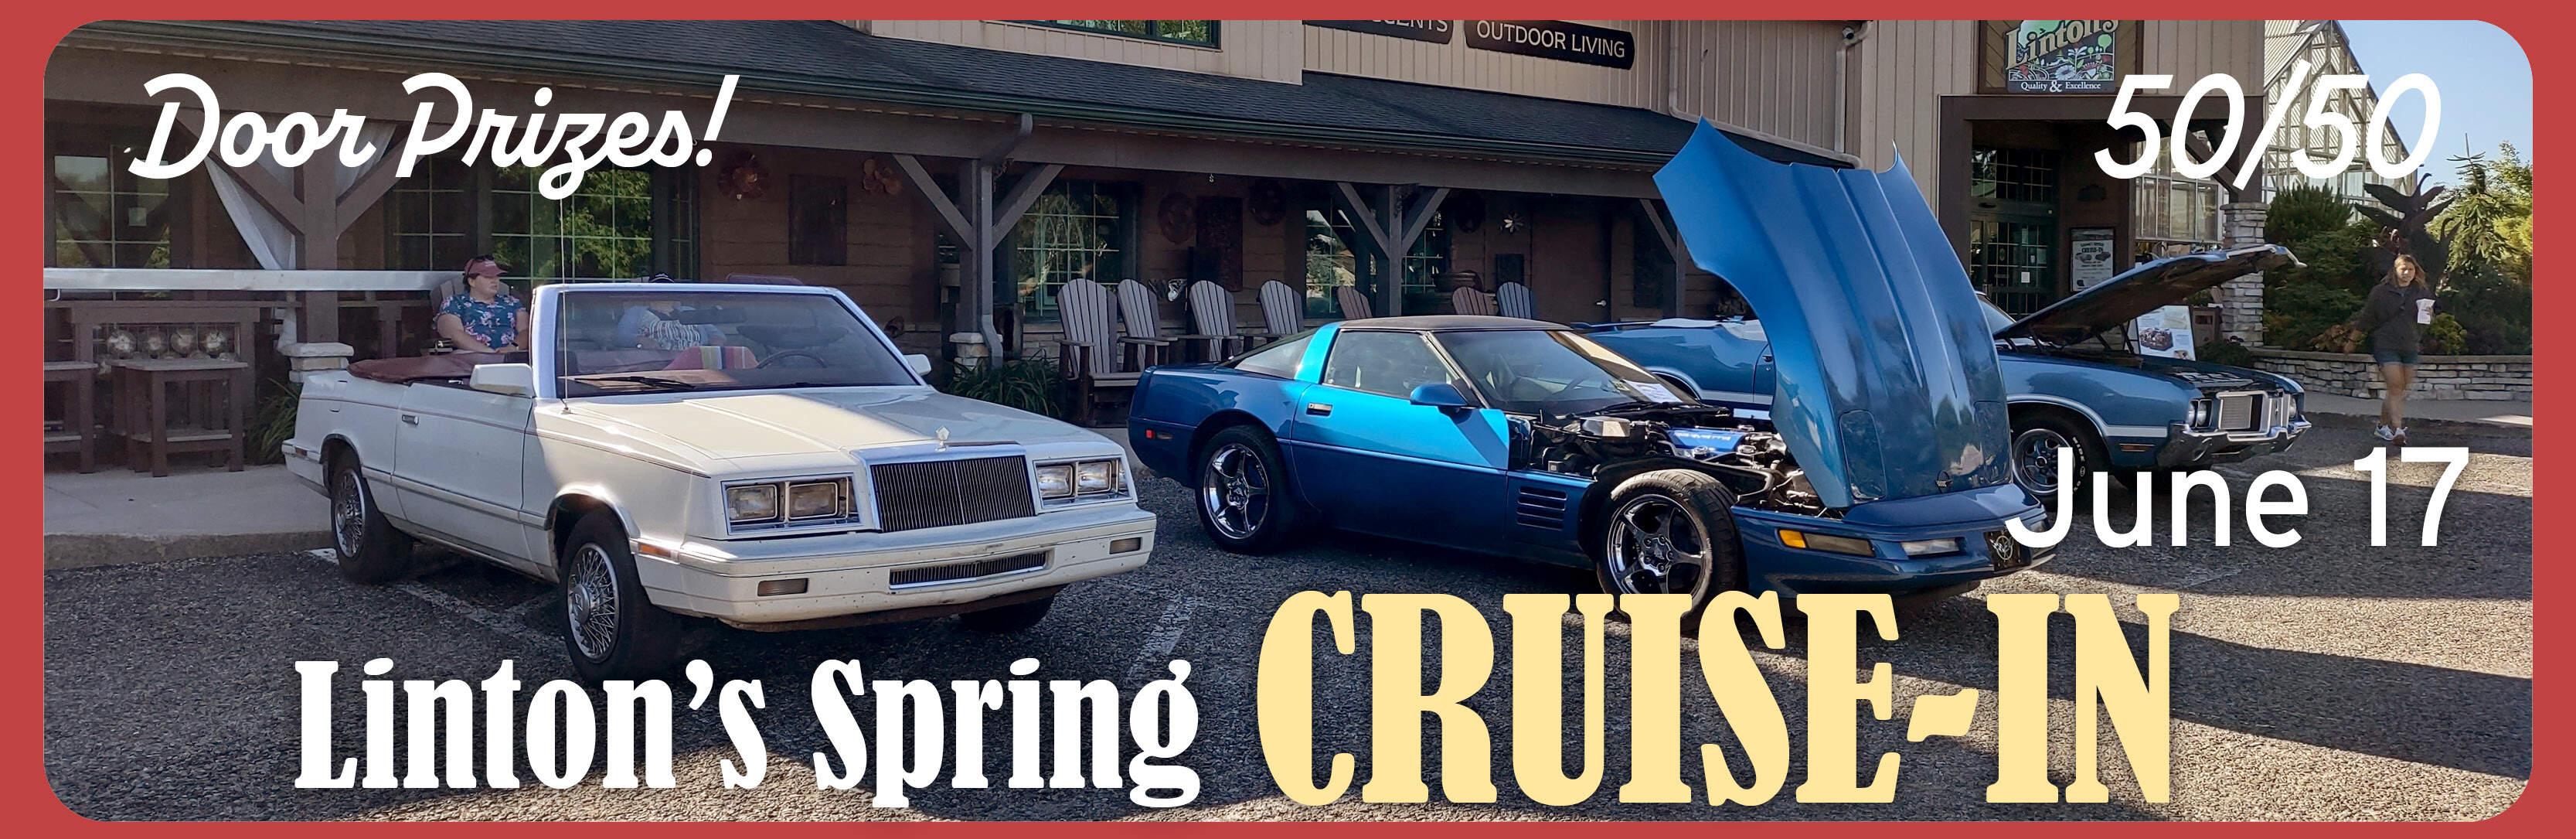 Linton's Spring Cruise In